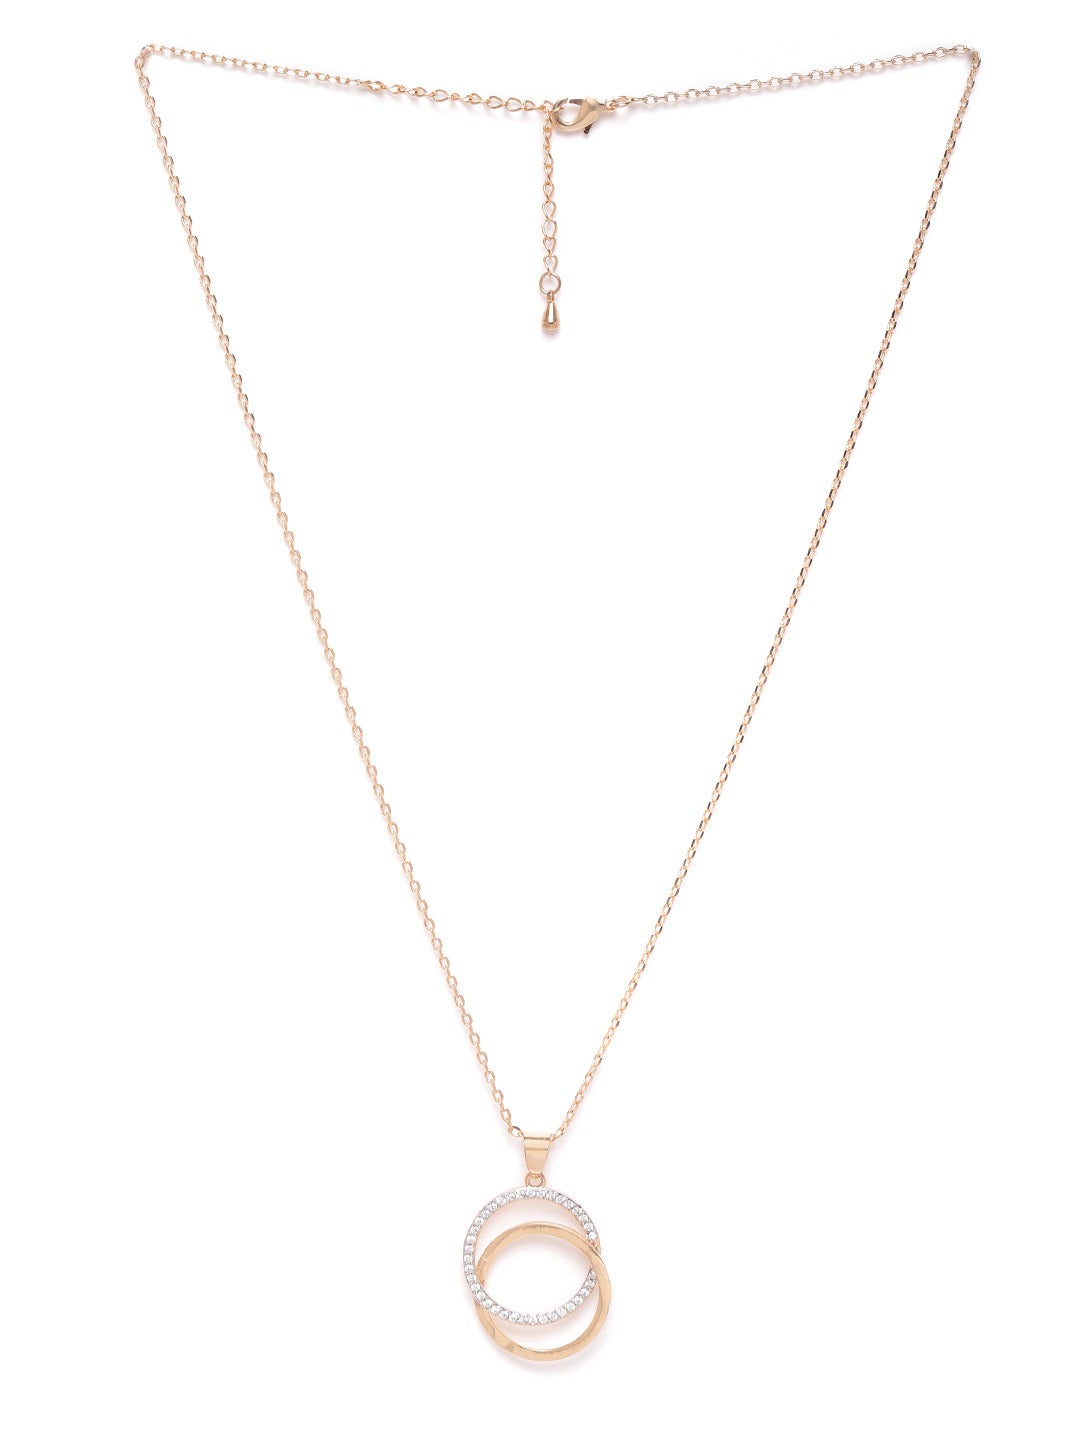 Women Rose Gold Plated CZ Stone-Studded Handcrafted Pendant With Chain